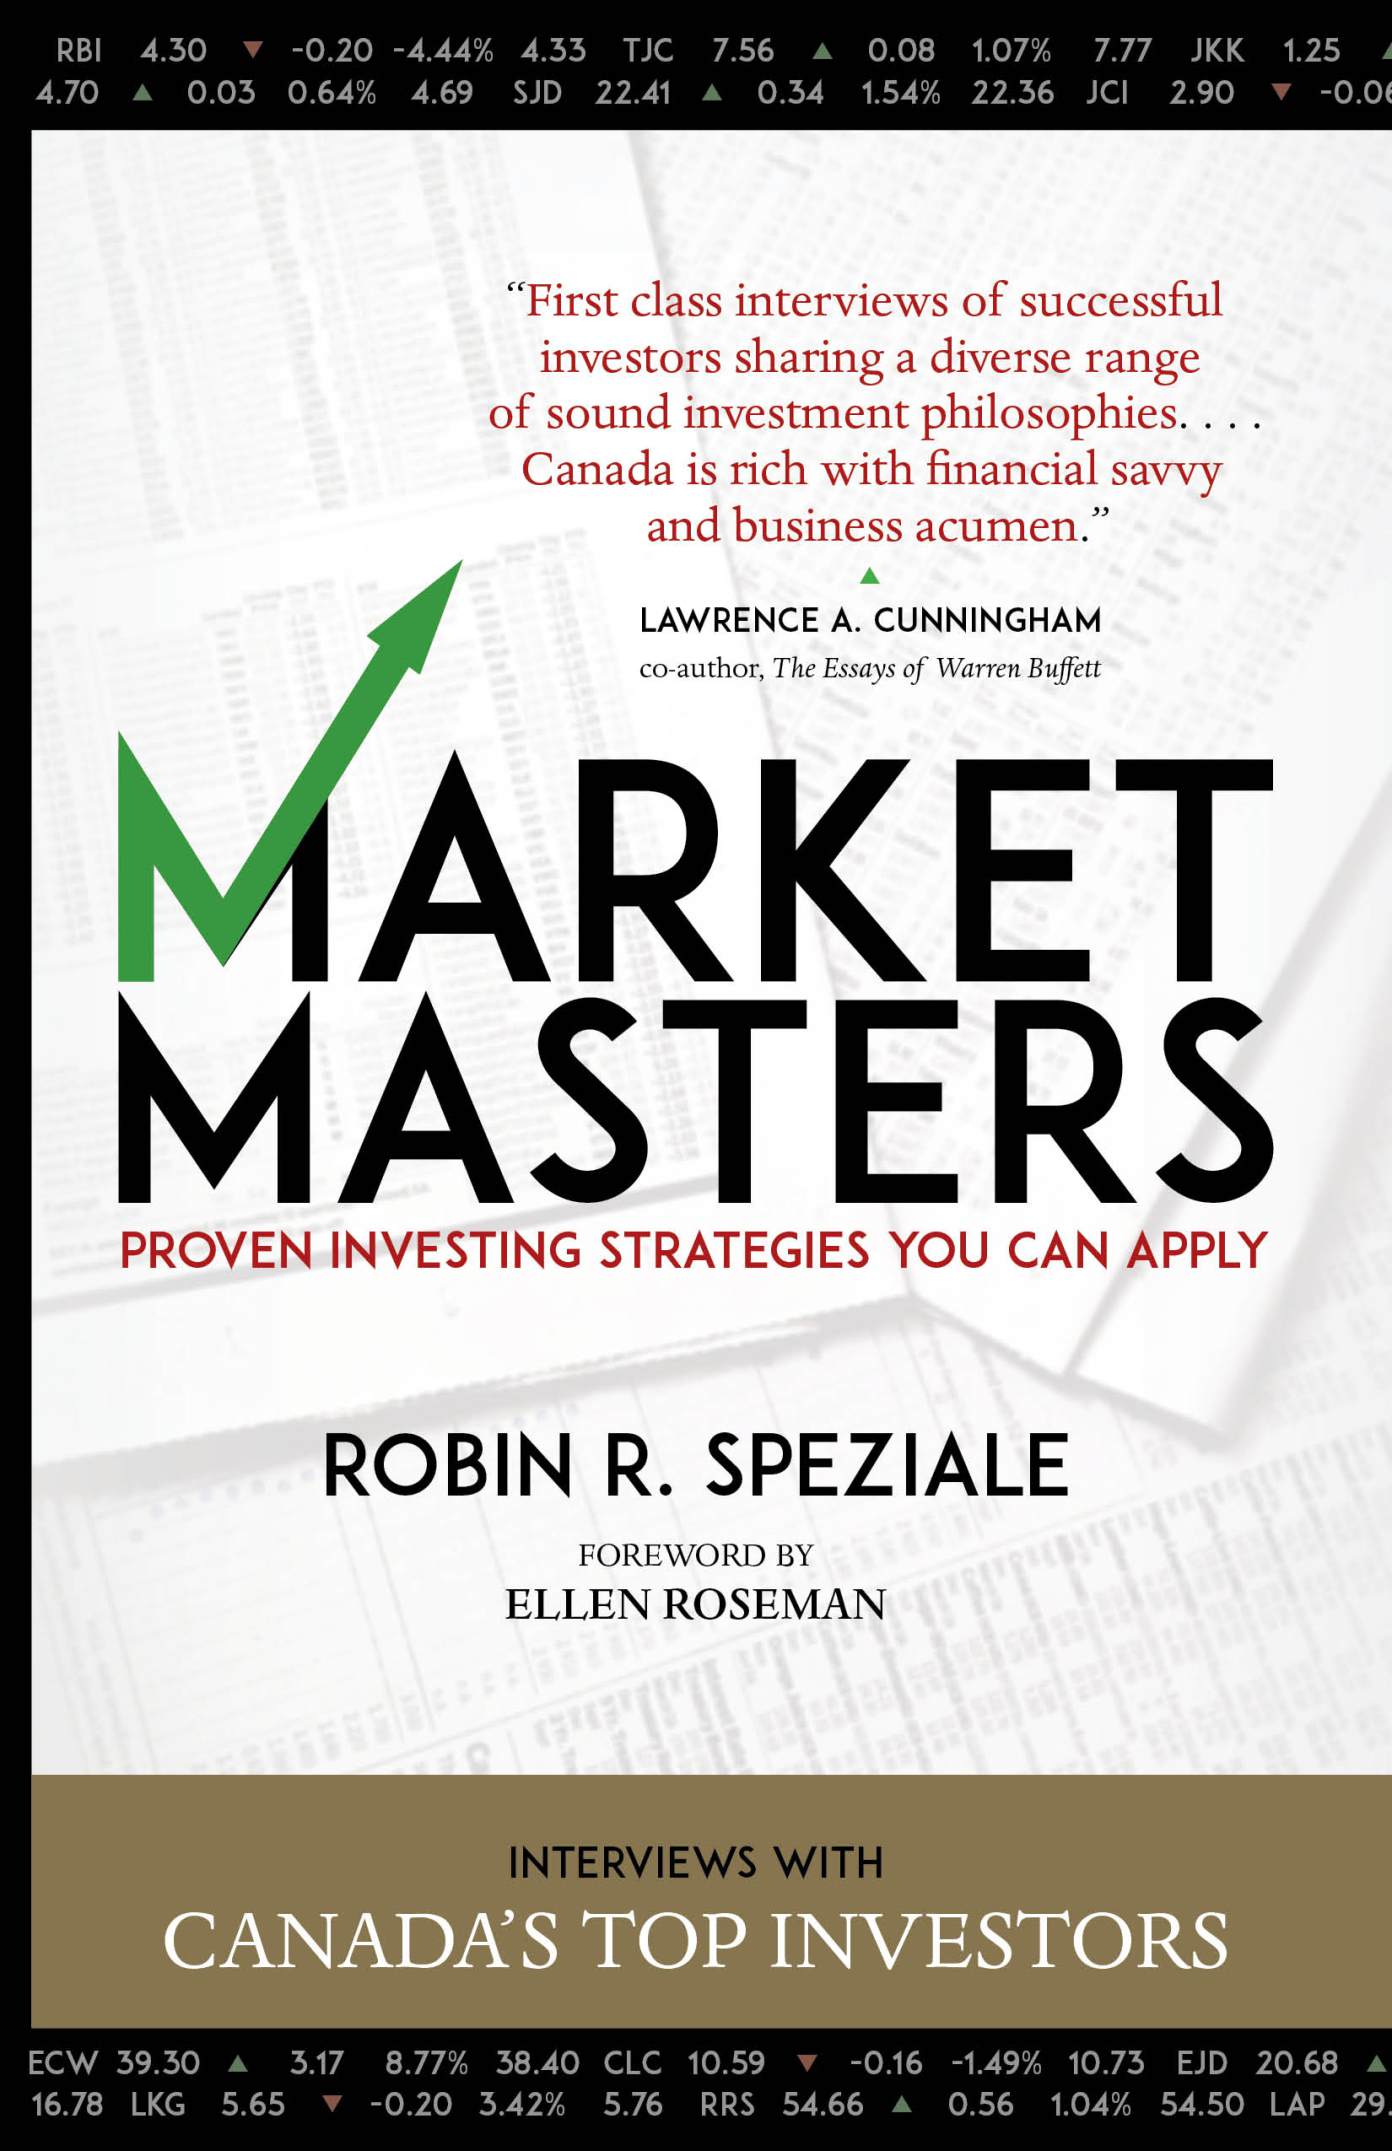 Market Masters book cover